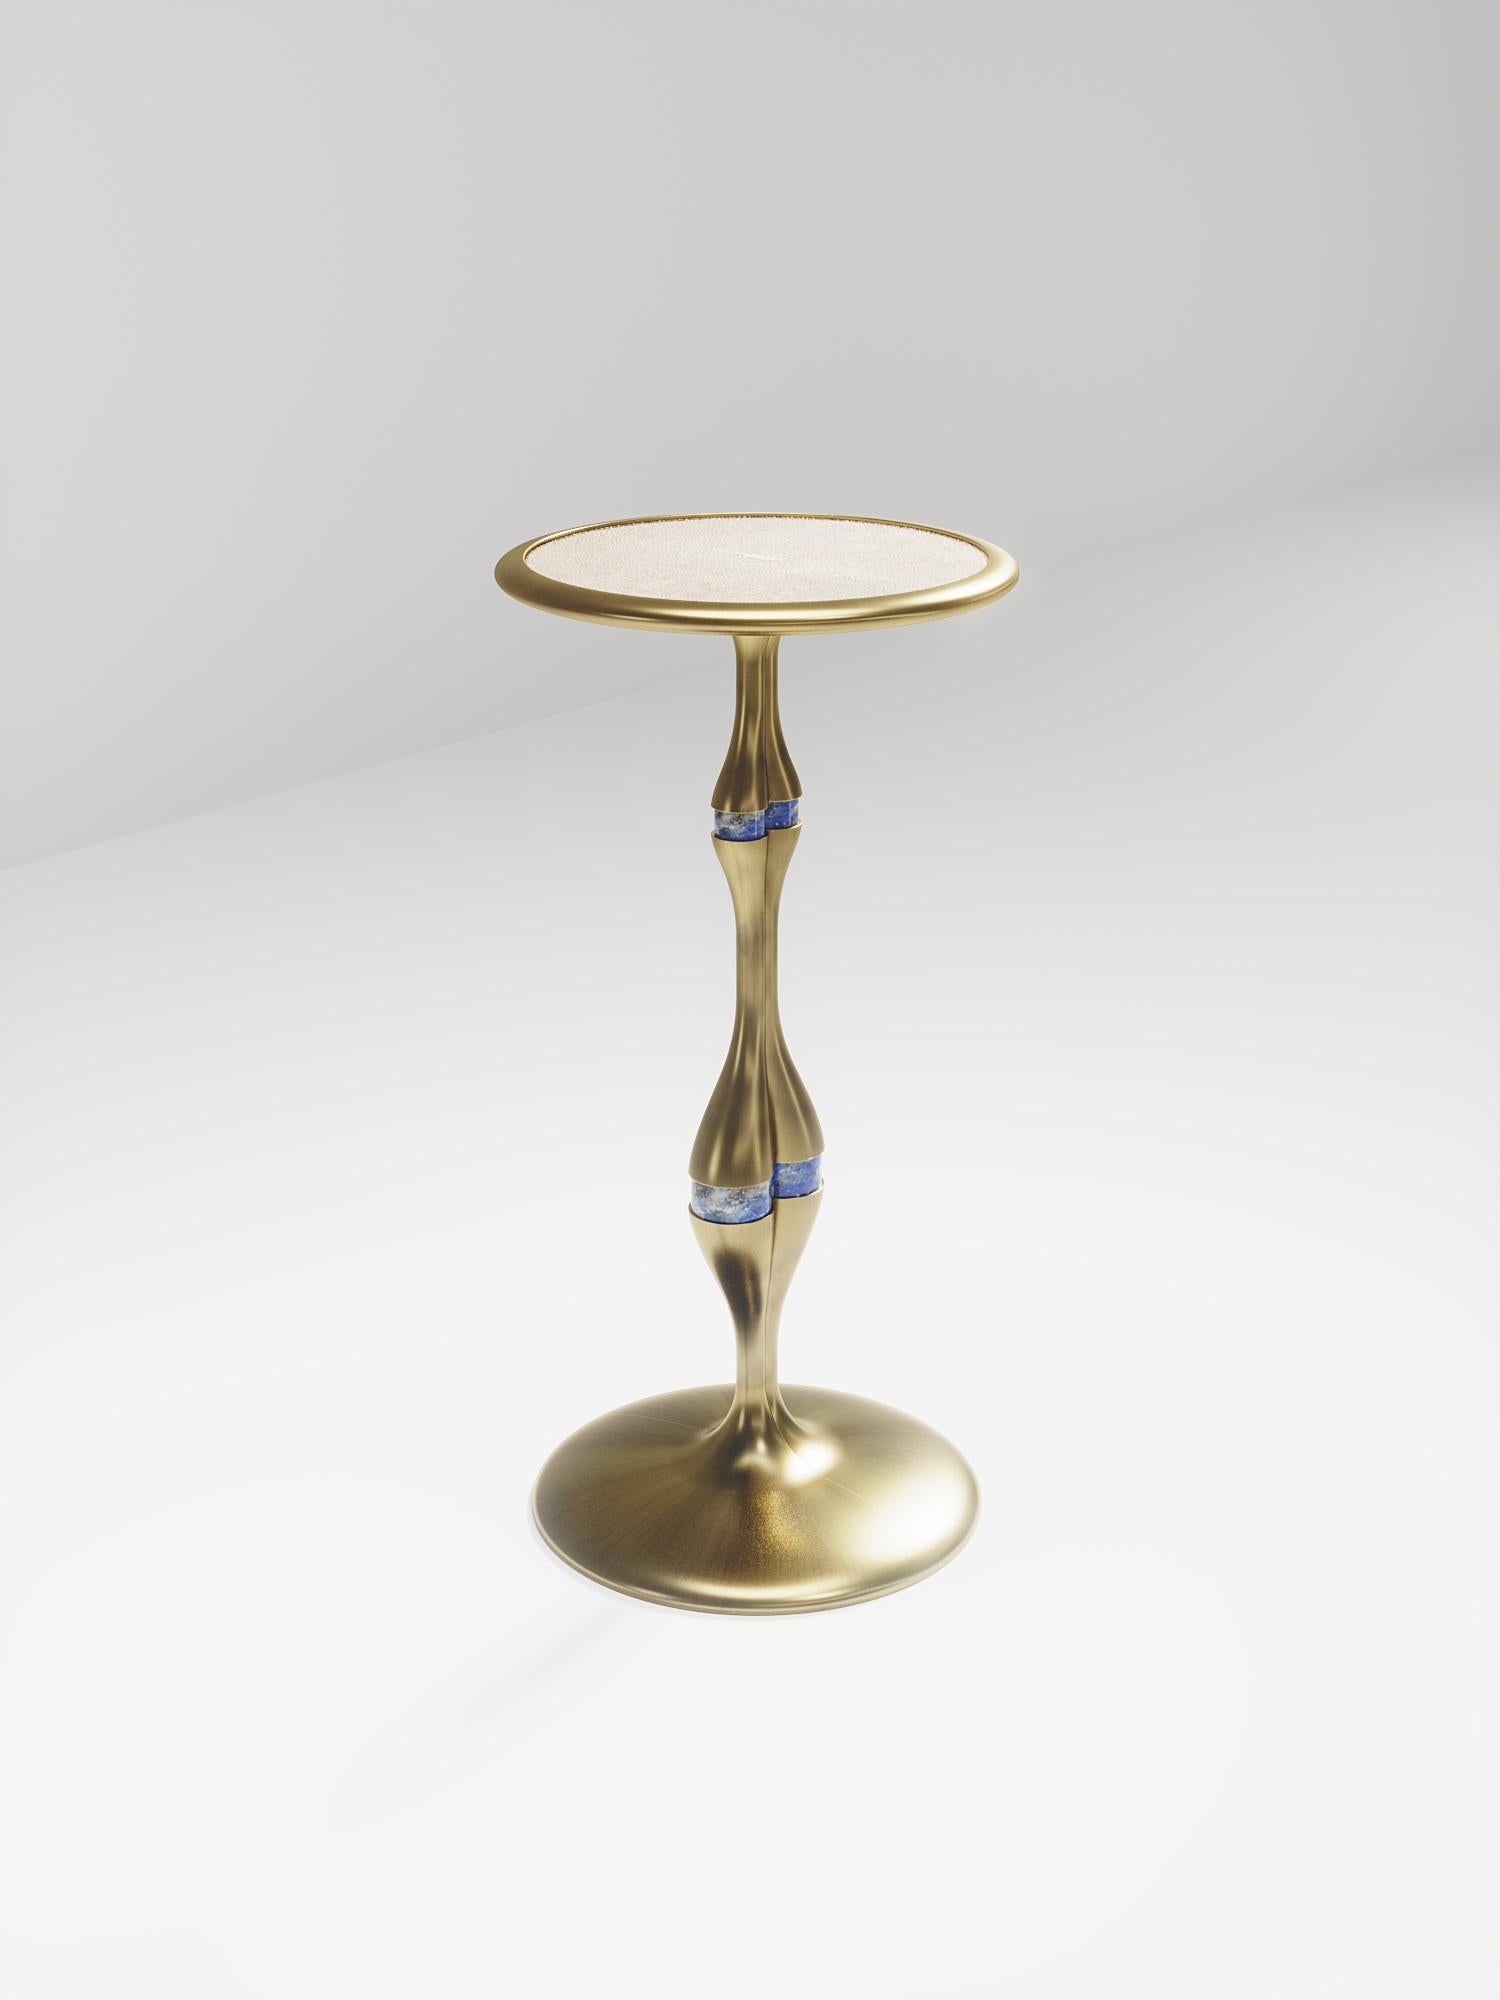 The Frequency side table I by R & Y Augousti is a sleek piece with a vintage-modern feel. The piece explores fluid organic lines with subtle detailing to create the signature Augousti aesthetic. The piece is inlaid in a mixture of cream shagreen and